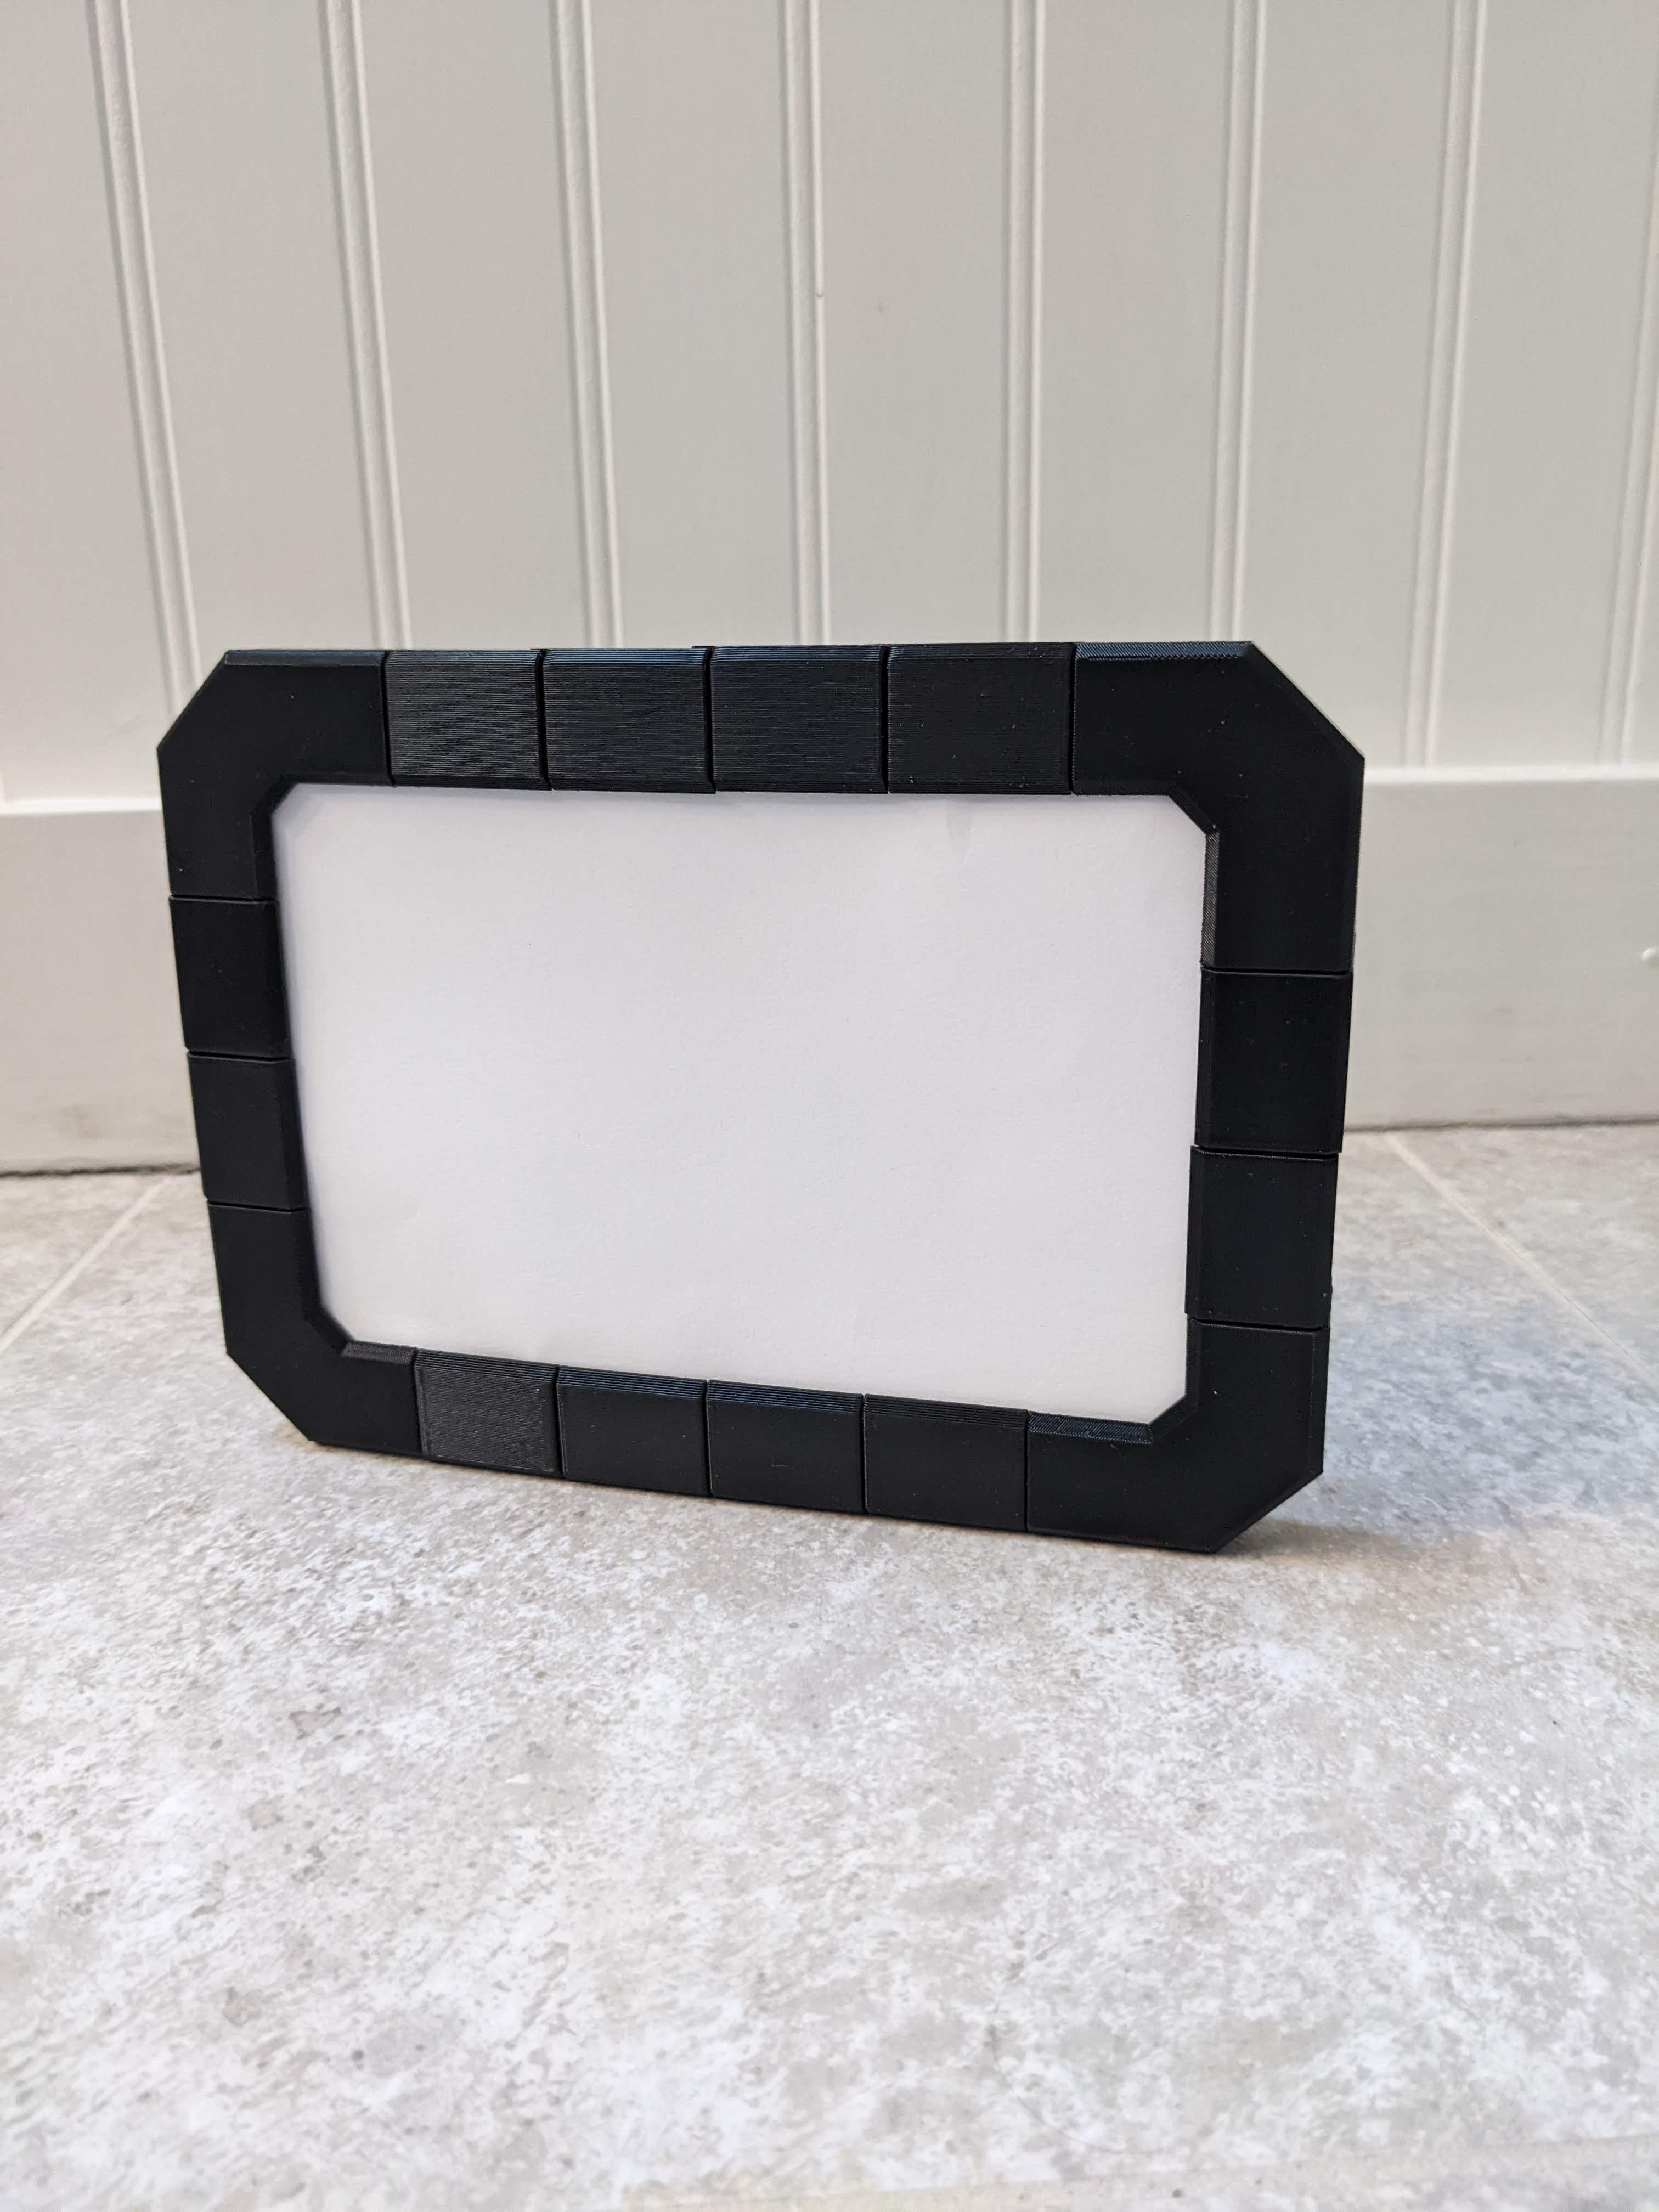 Modular picture frame